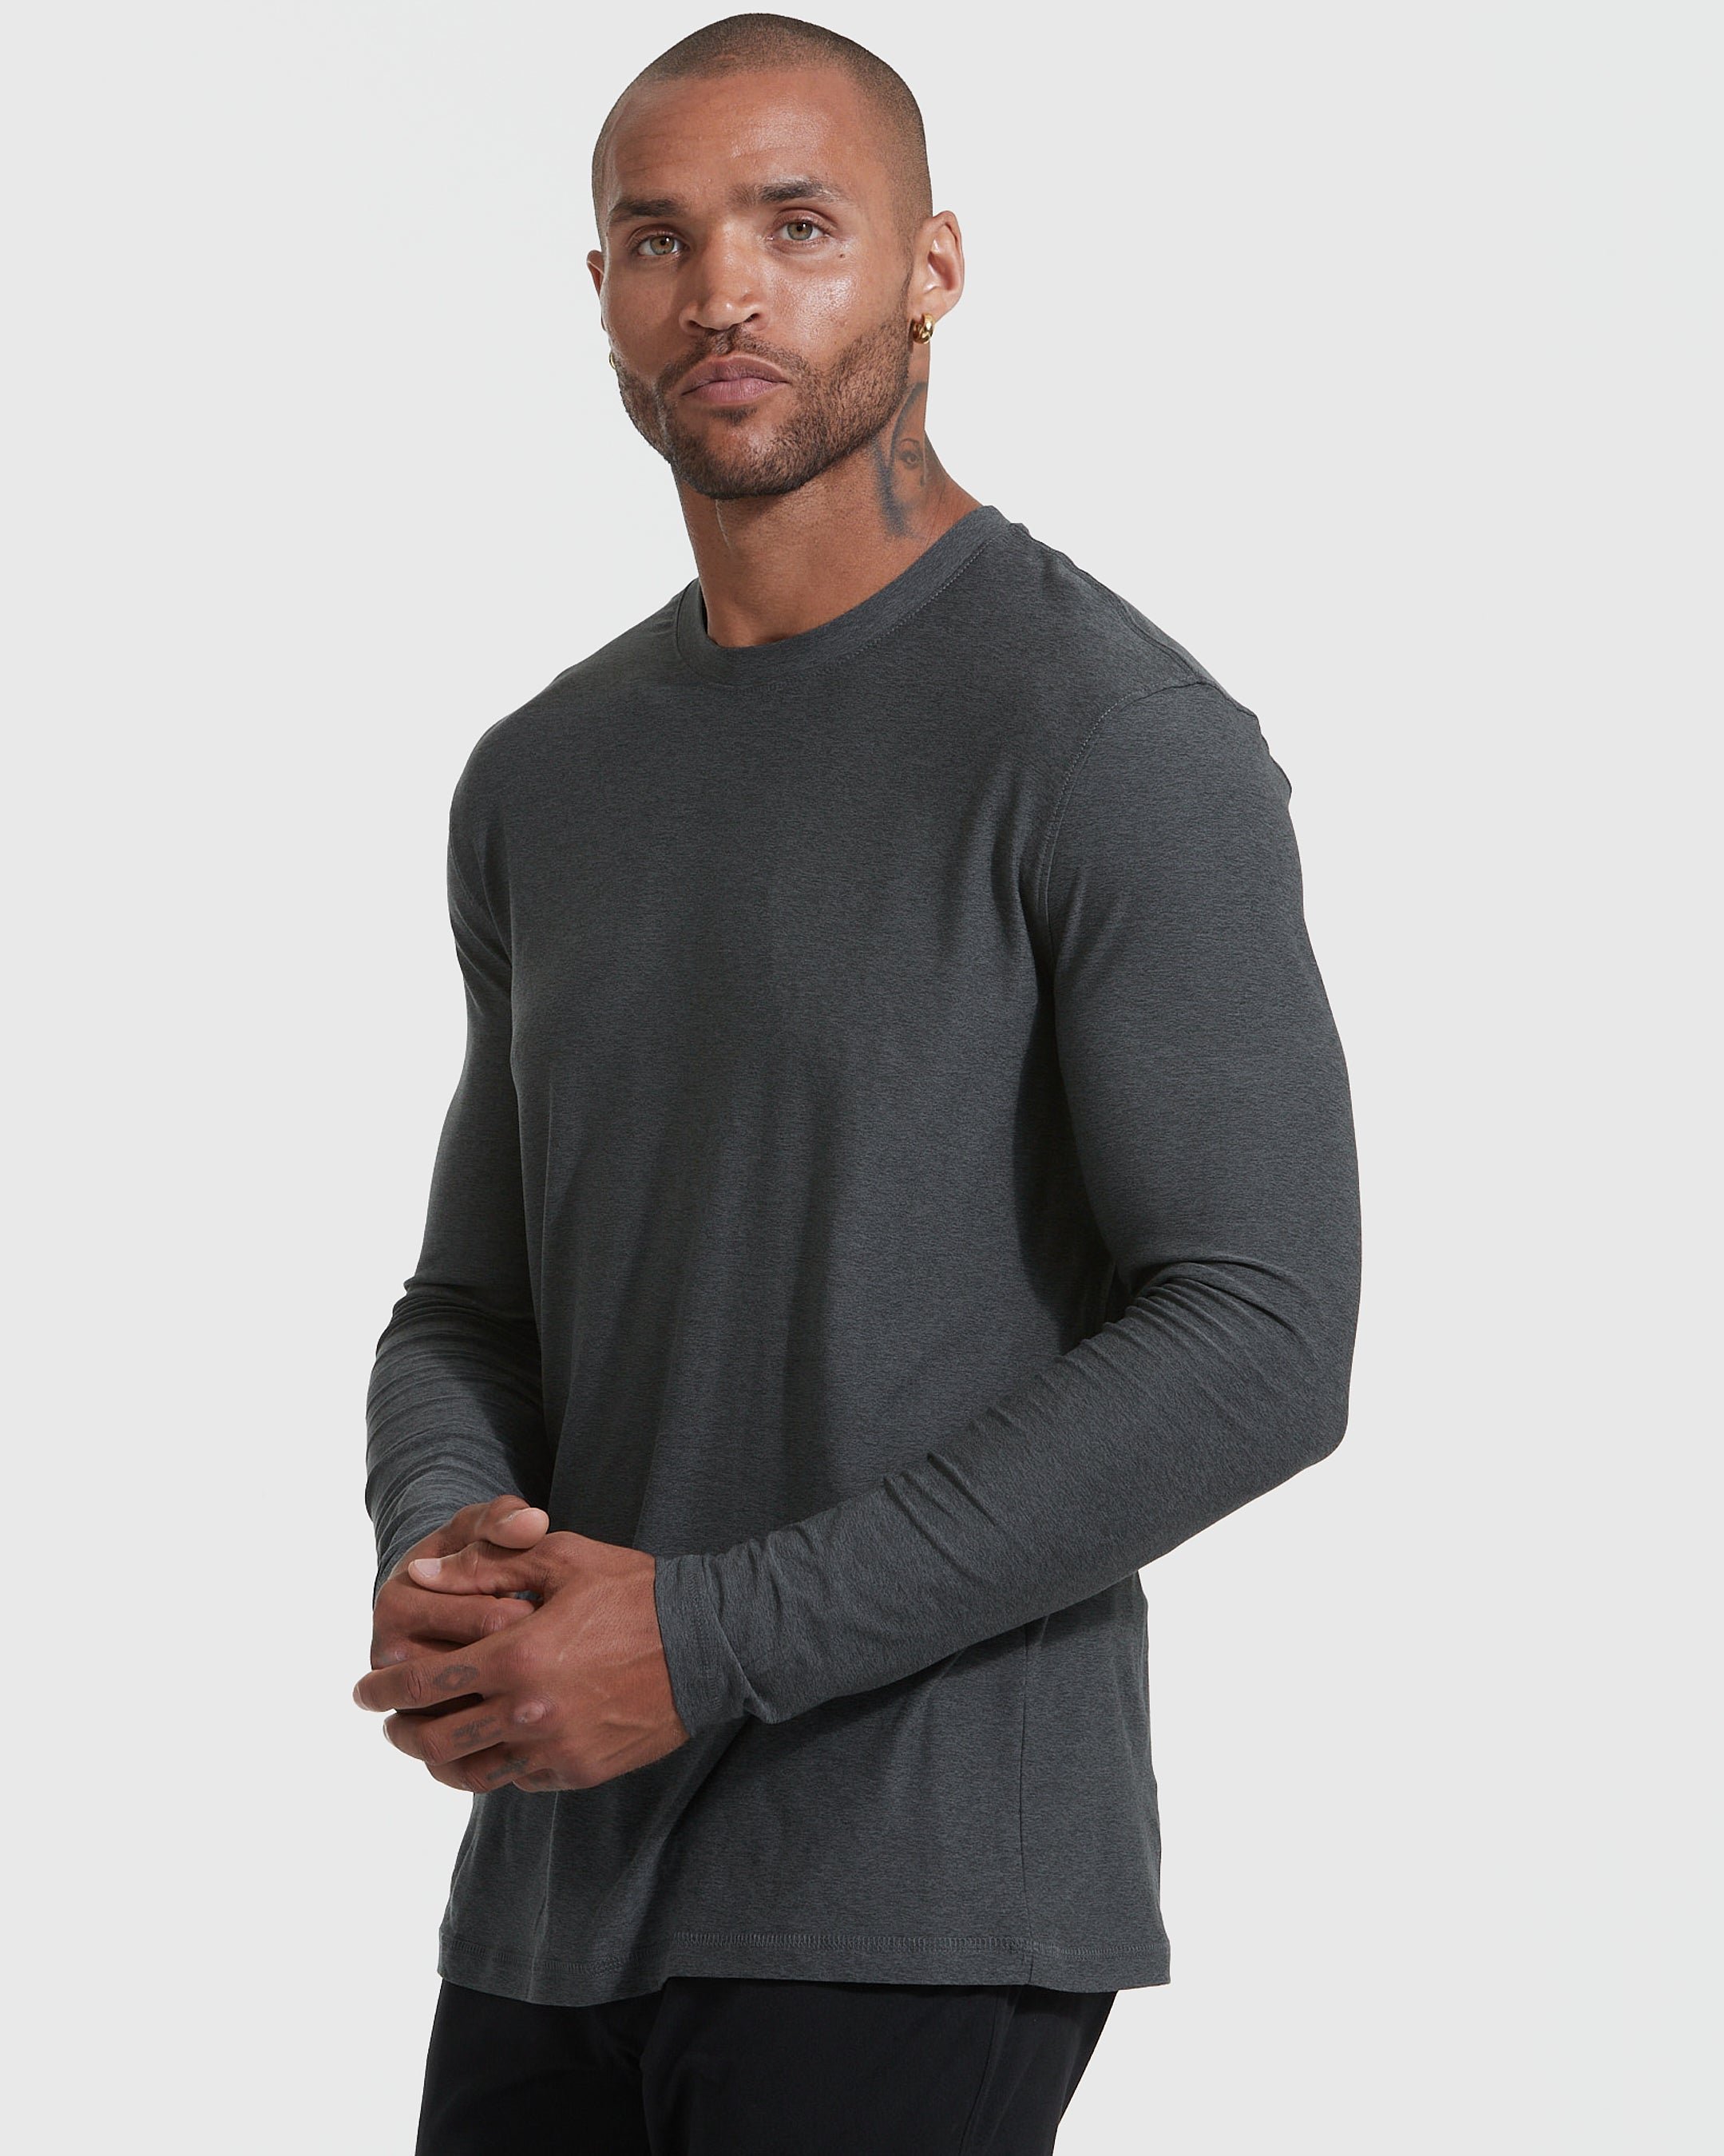 Heather Color Active Long Sleeve Crew 3-Pack